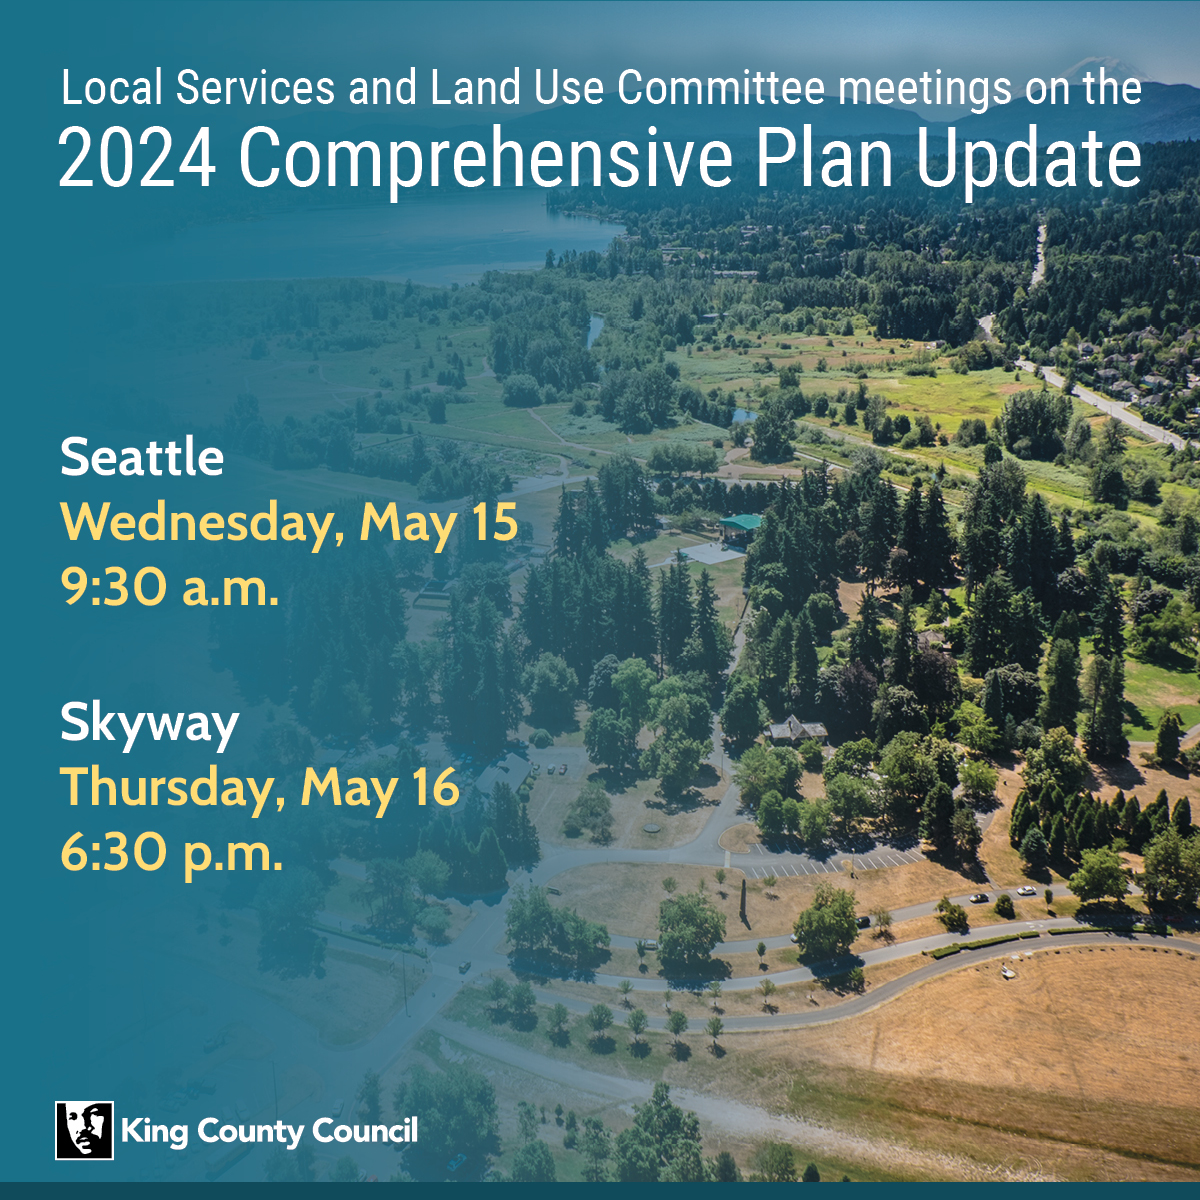 Need your input! 
King County Comprehensive Plan meetings:
Downtown Seattle, Wed, 5/15, 9:30am, King County Courthouse, 516 3rd Ave, Floor 10.
Skyway, Thurs, 5/16, 6:30pm, Skyway VFW Post, 7421 S 126th St, Seattle, 98178.
Or, watch live: kingcounty.gov/kctv